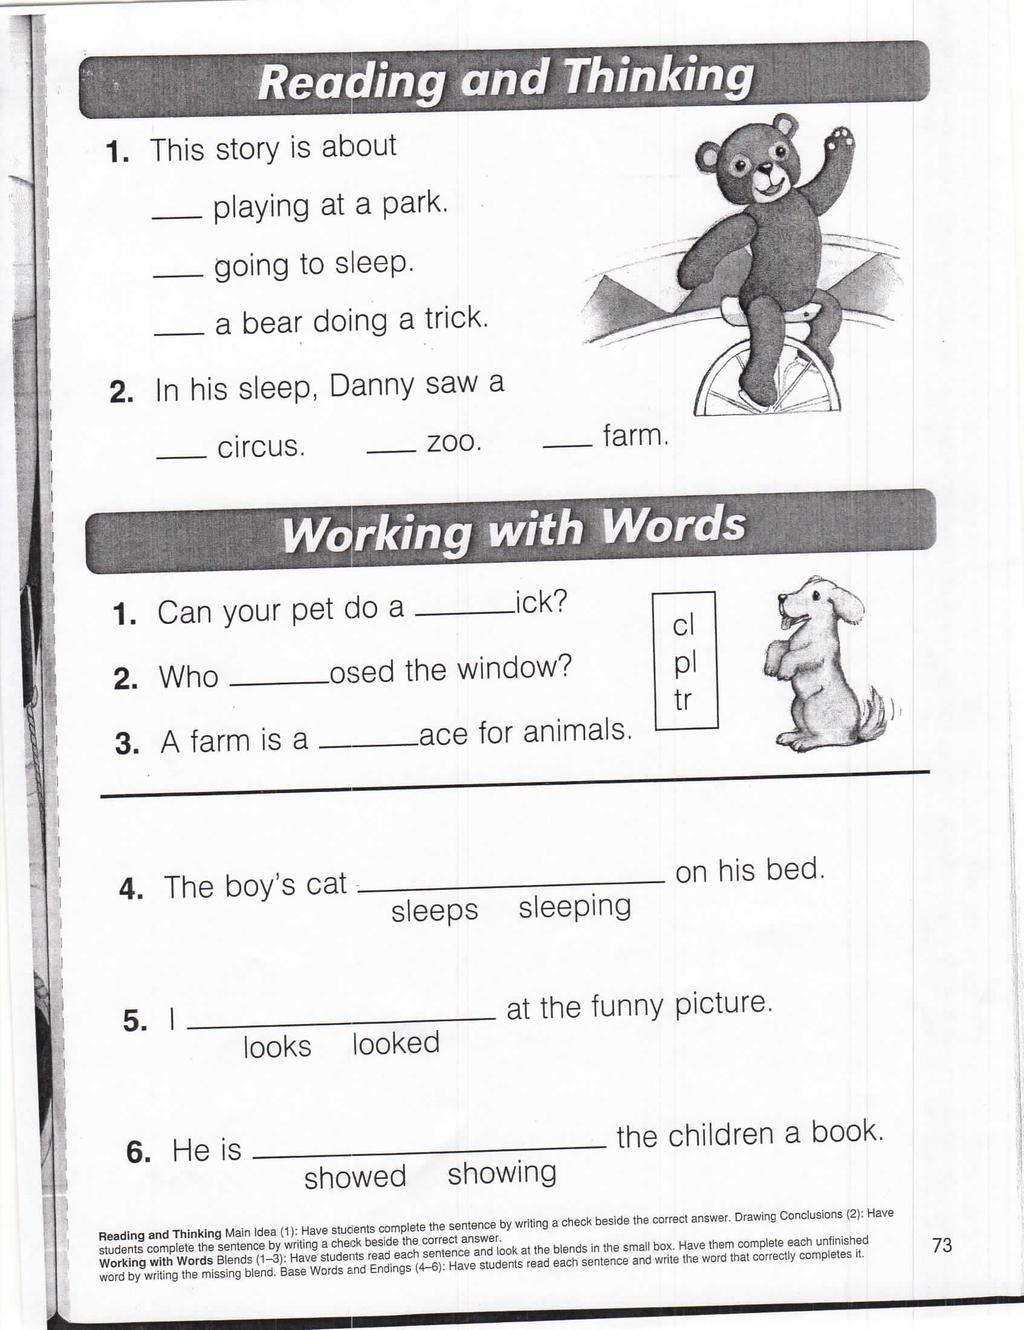 Reacting and Thinking 1. This story is about playing at a park. ' going to sleep. \ a bear doing a trick. 2. In his sleep, Danny saw a circus. zoo. Working with 1- Can your pet do a ick?